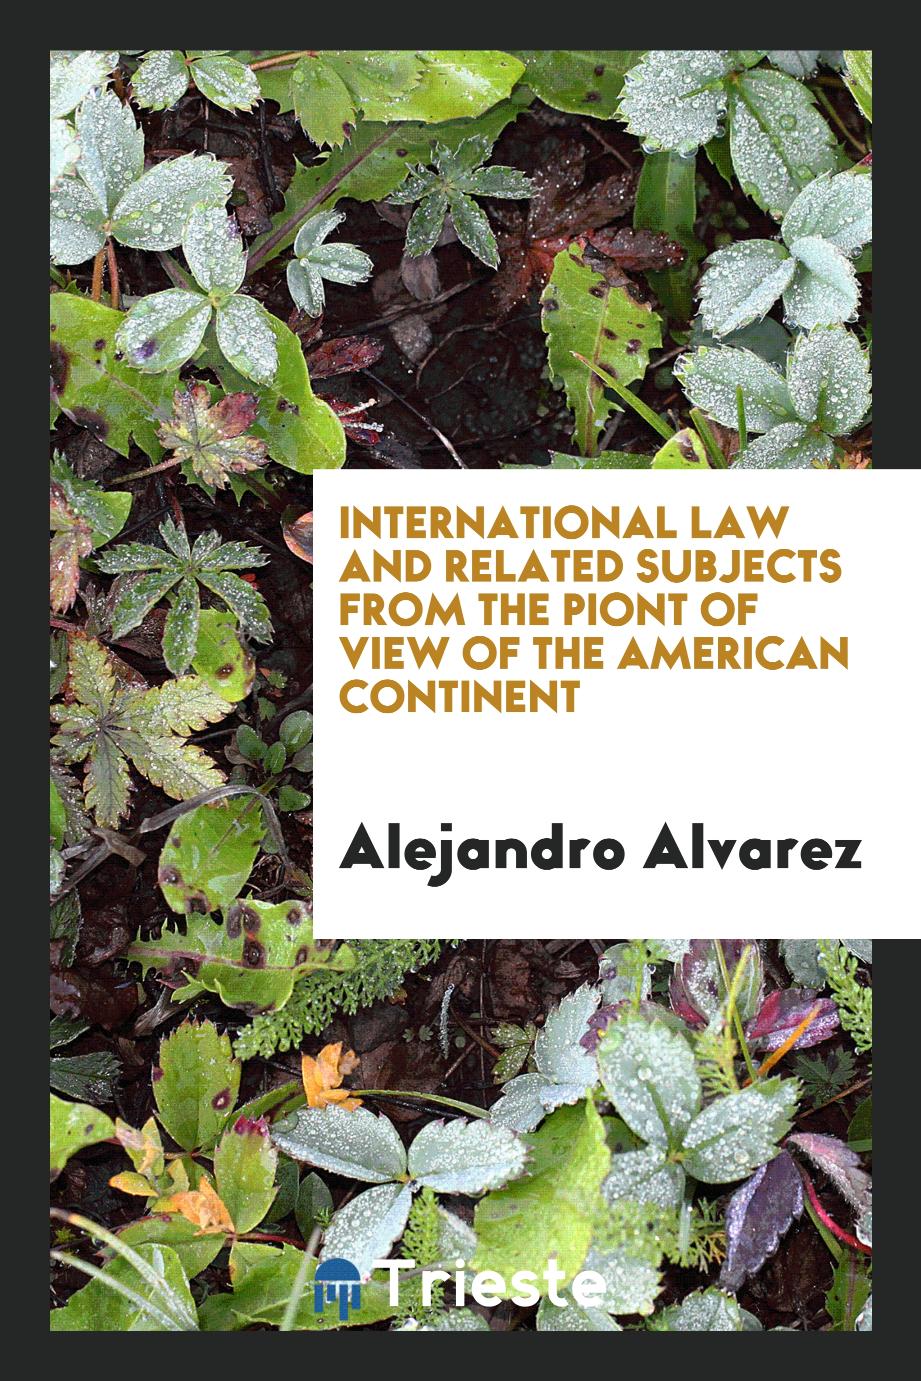 International Law and Related Subjects From the Piont of View of the American Continent